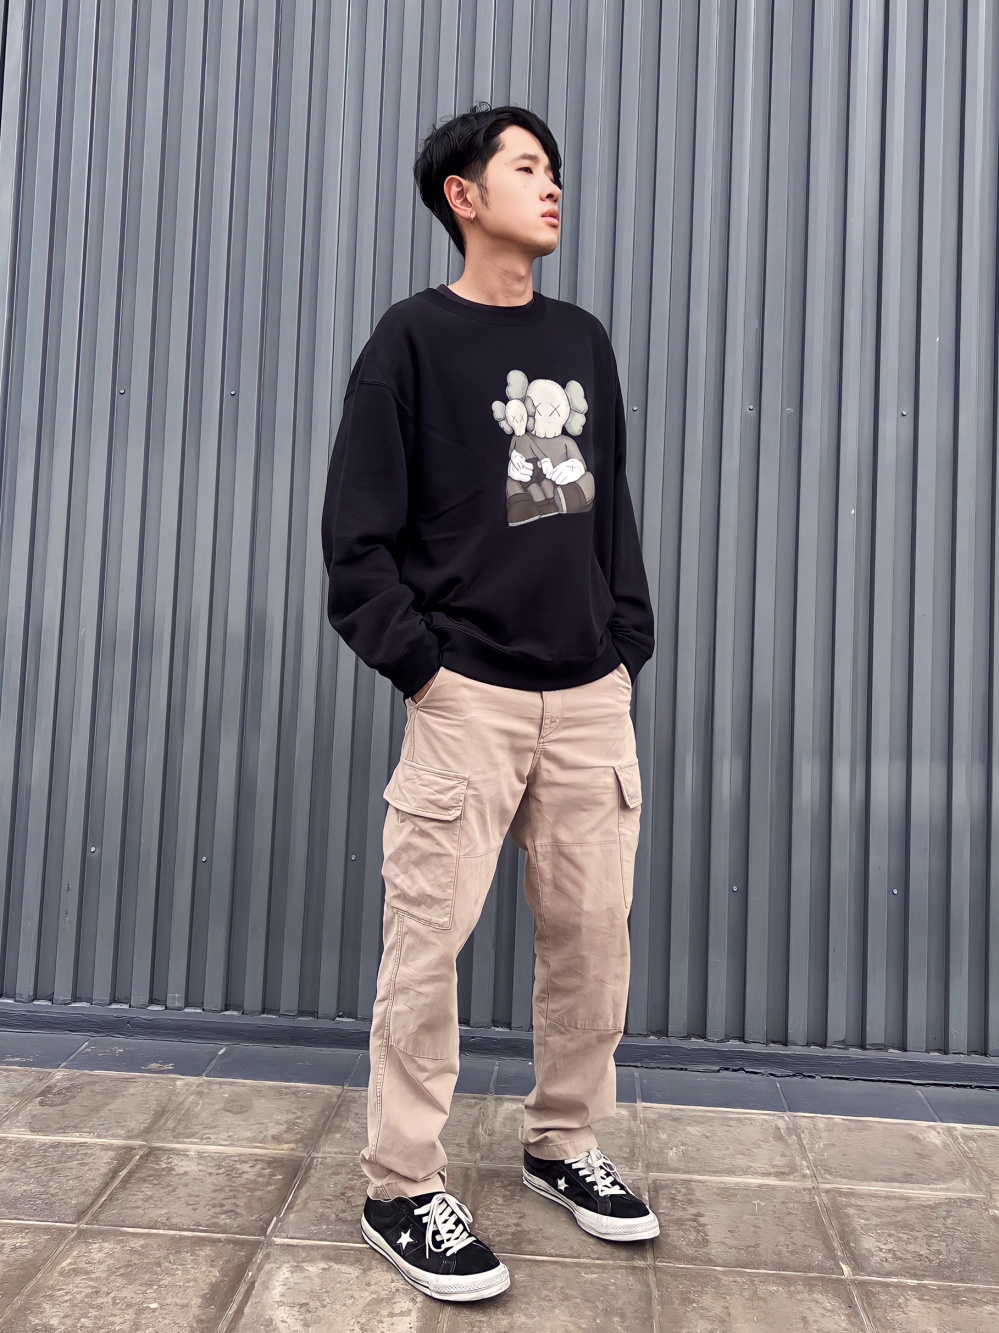 Check styling ideas for「KAWS Sweat Long Sleeve Shirt、Cargo pants」